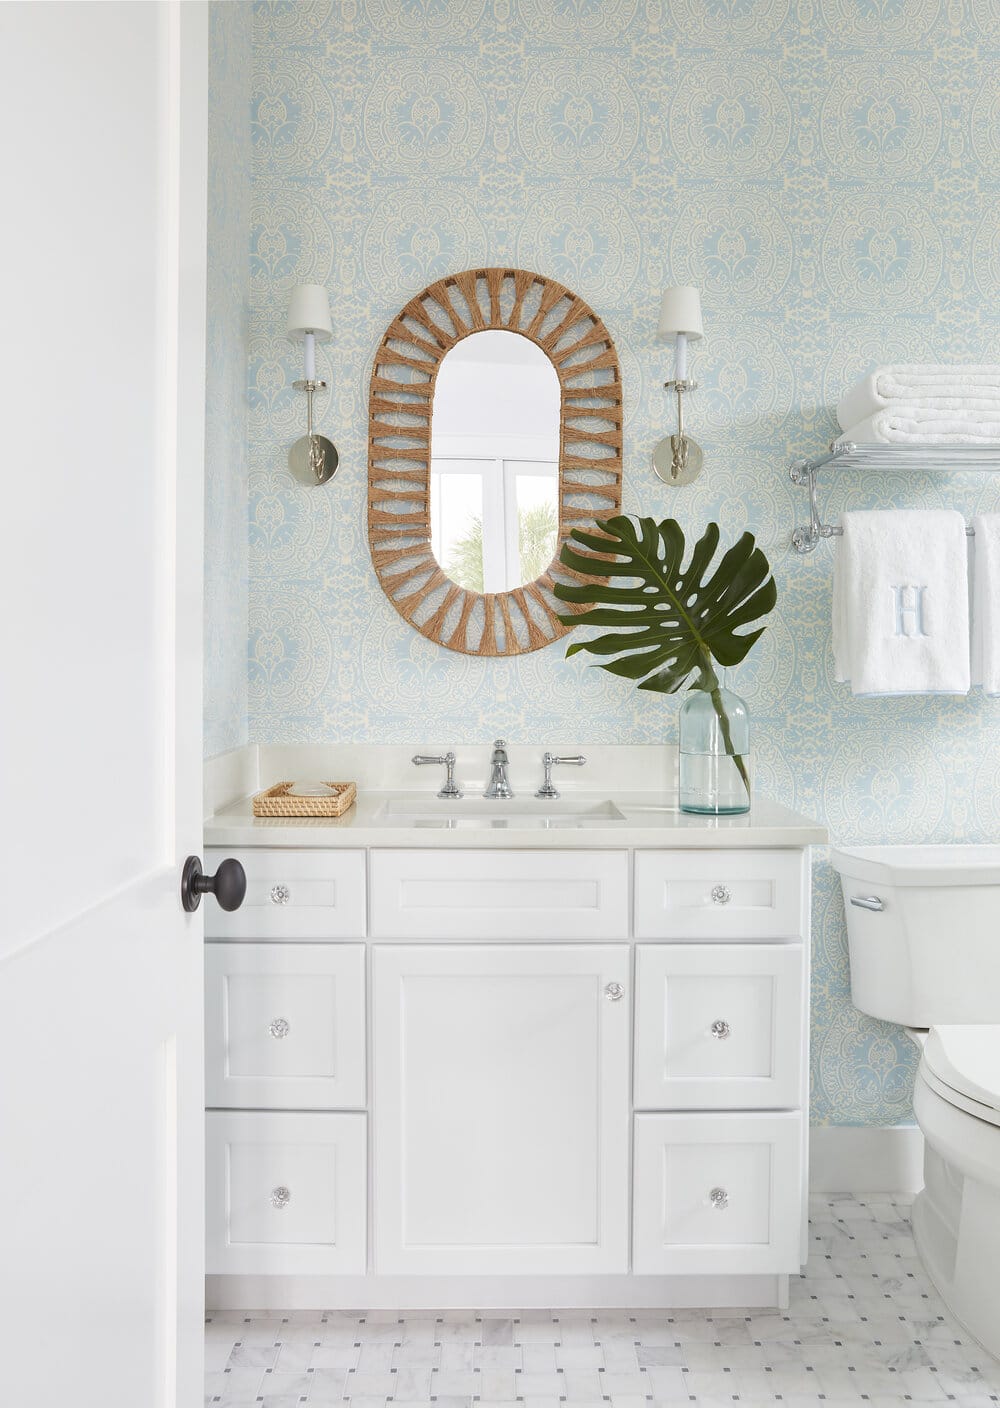 Easy Elegance with Kara Miller Interiors Brantley Photography blue and white bathroom